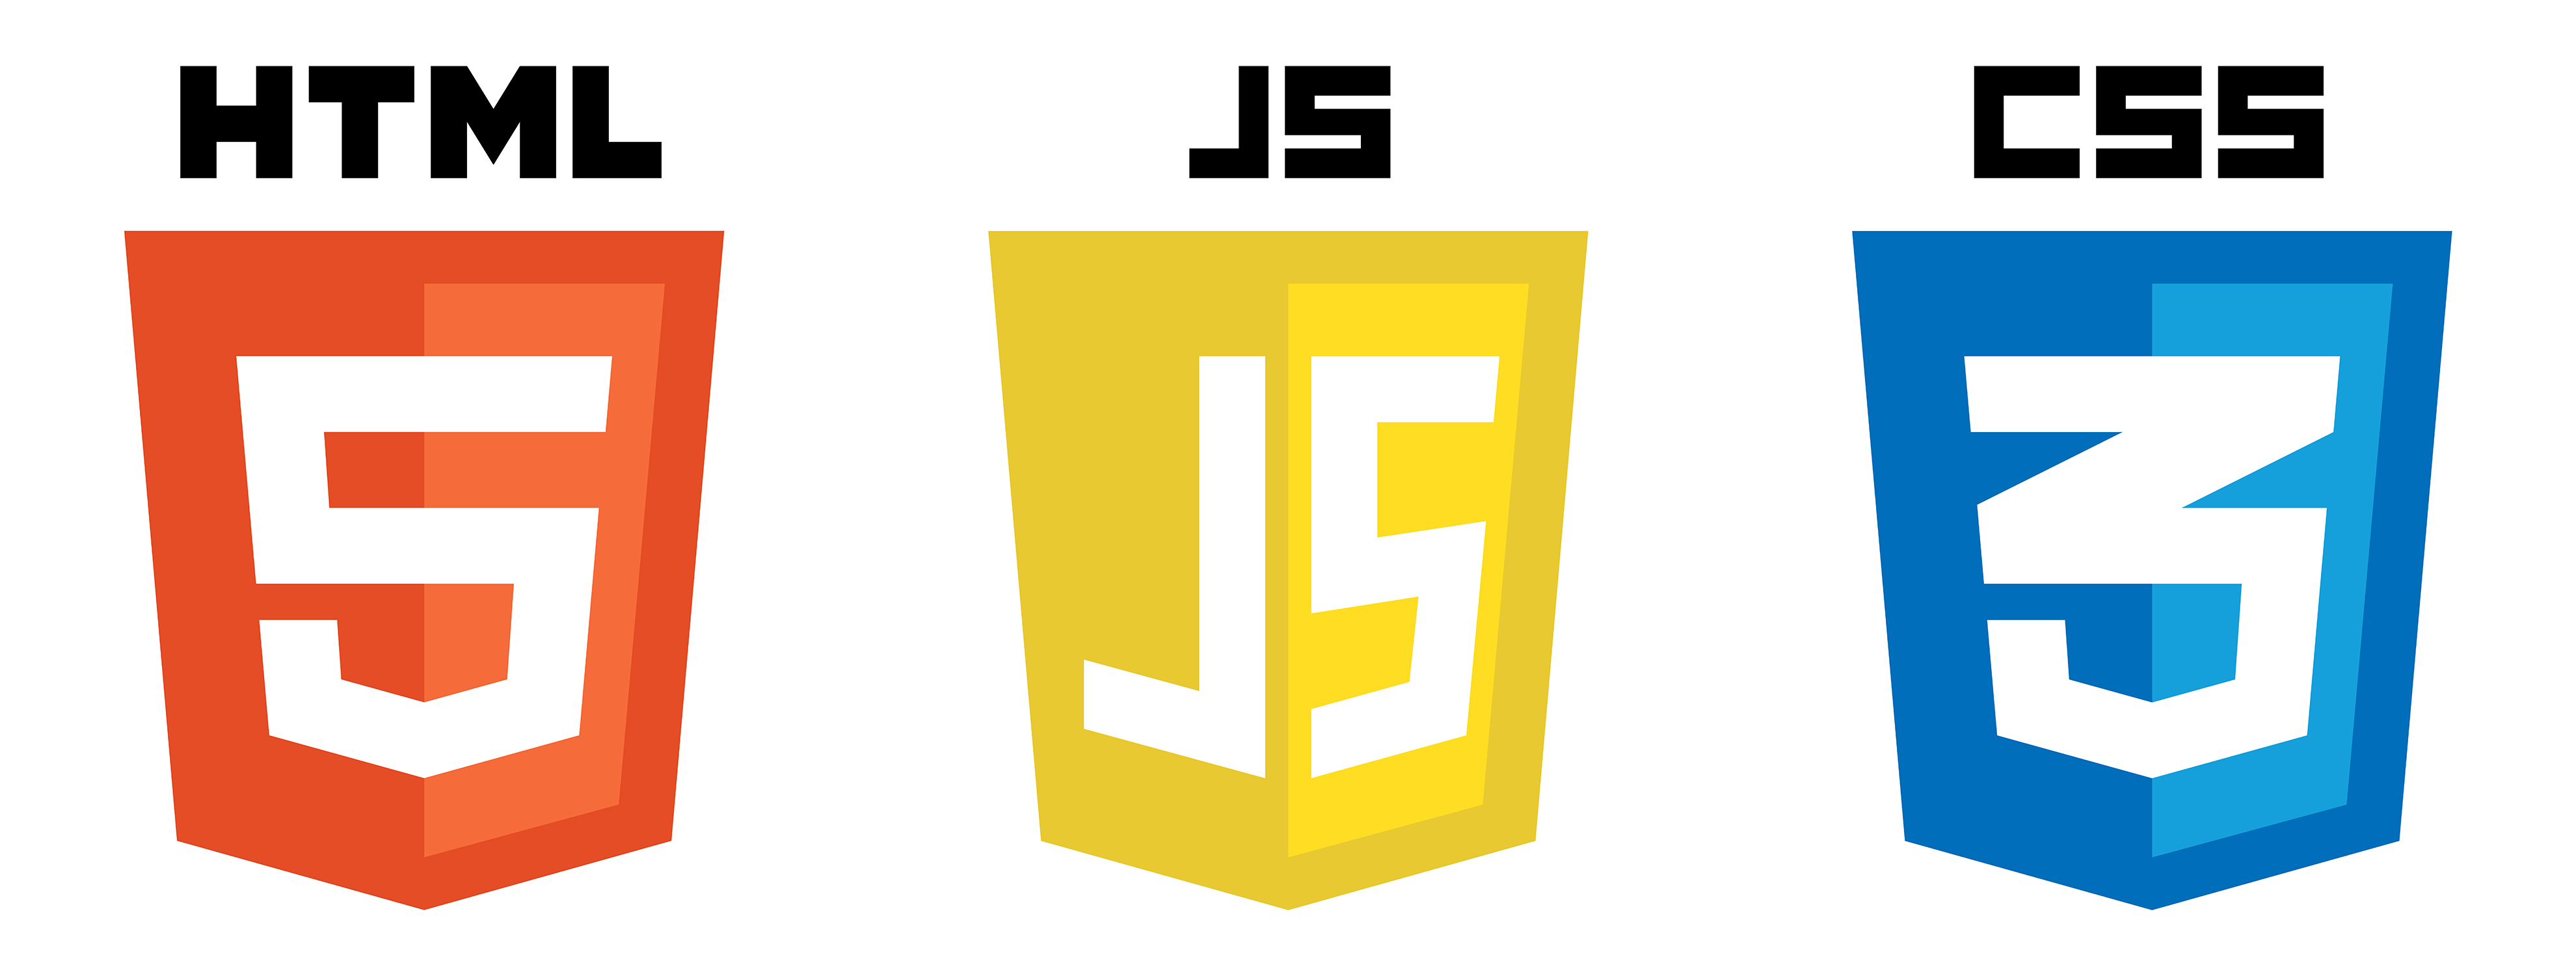 The HTML5, CSS3 and JS logos